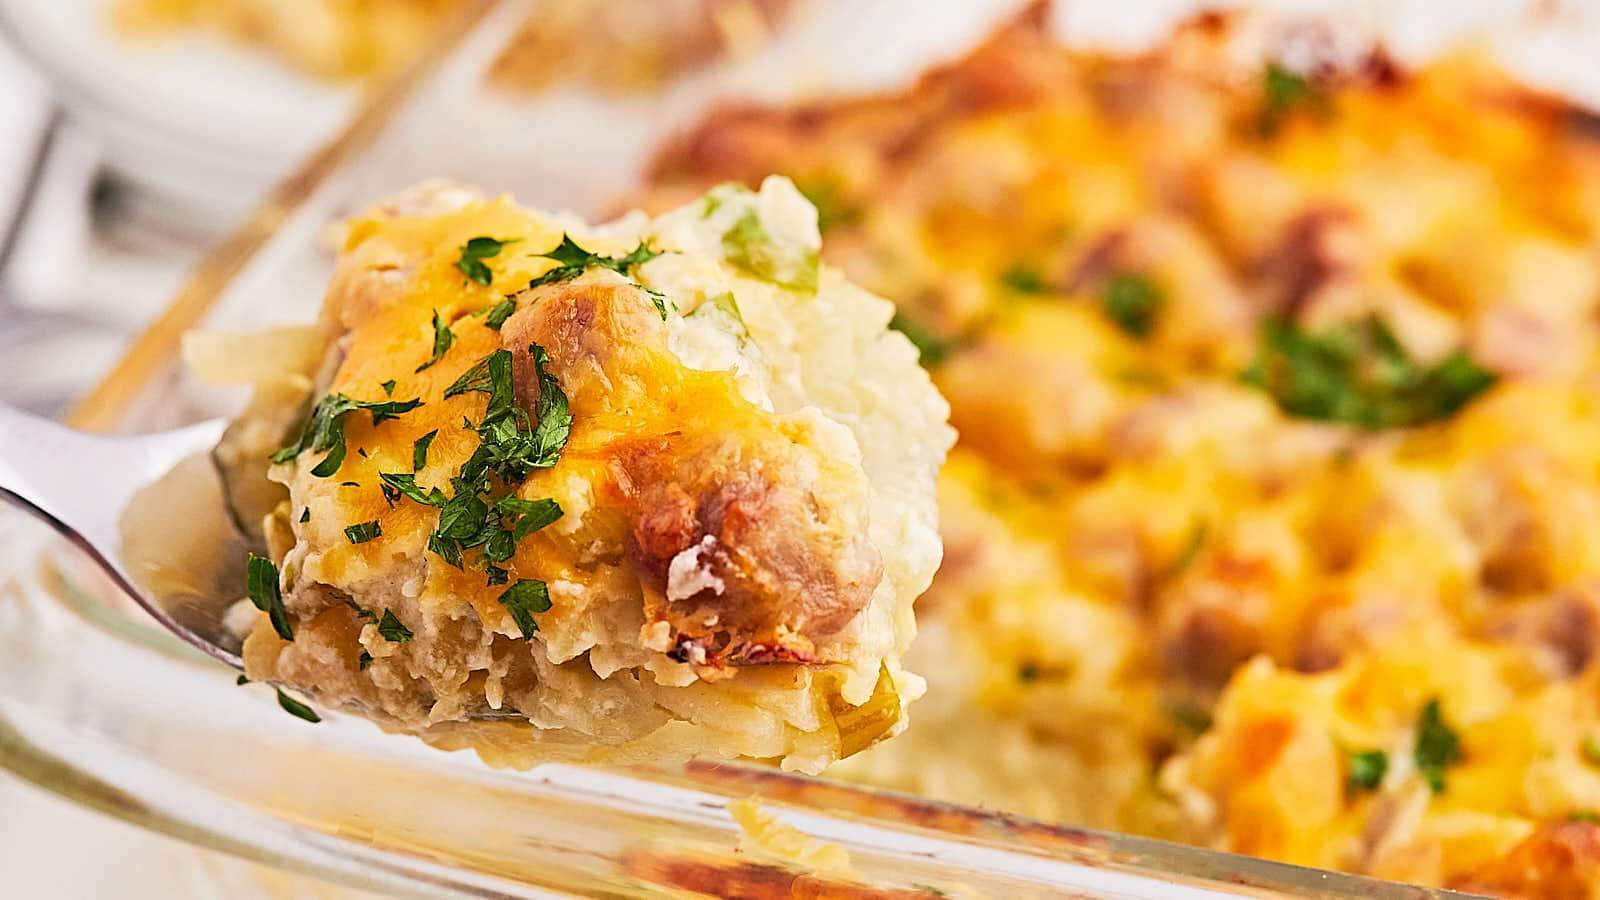 Sausage and Hash Brown Casserole recipe.